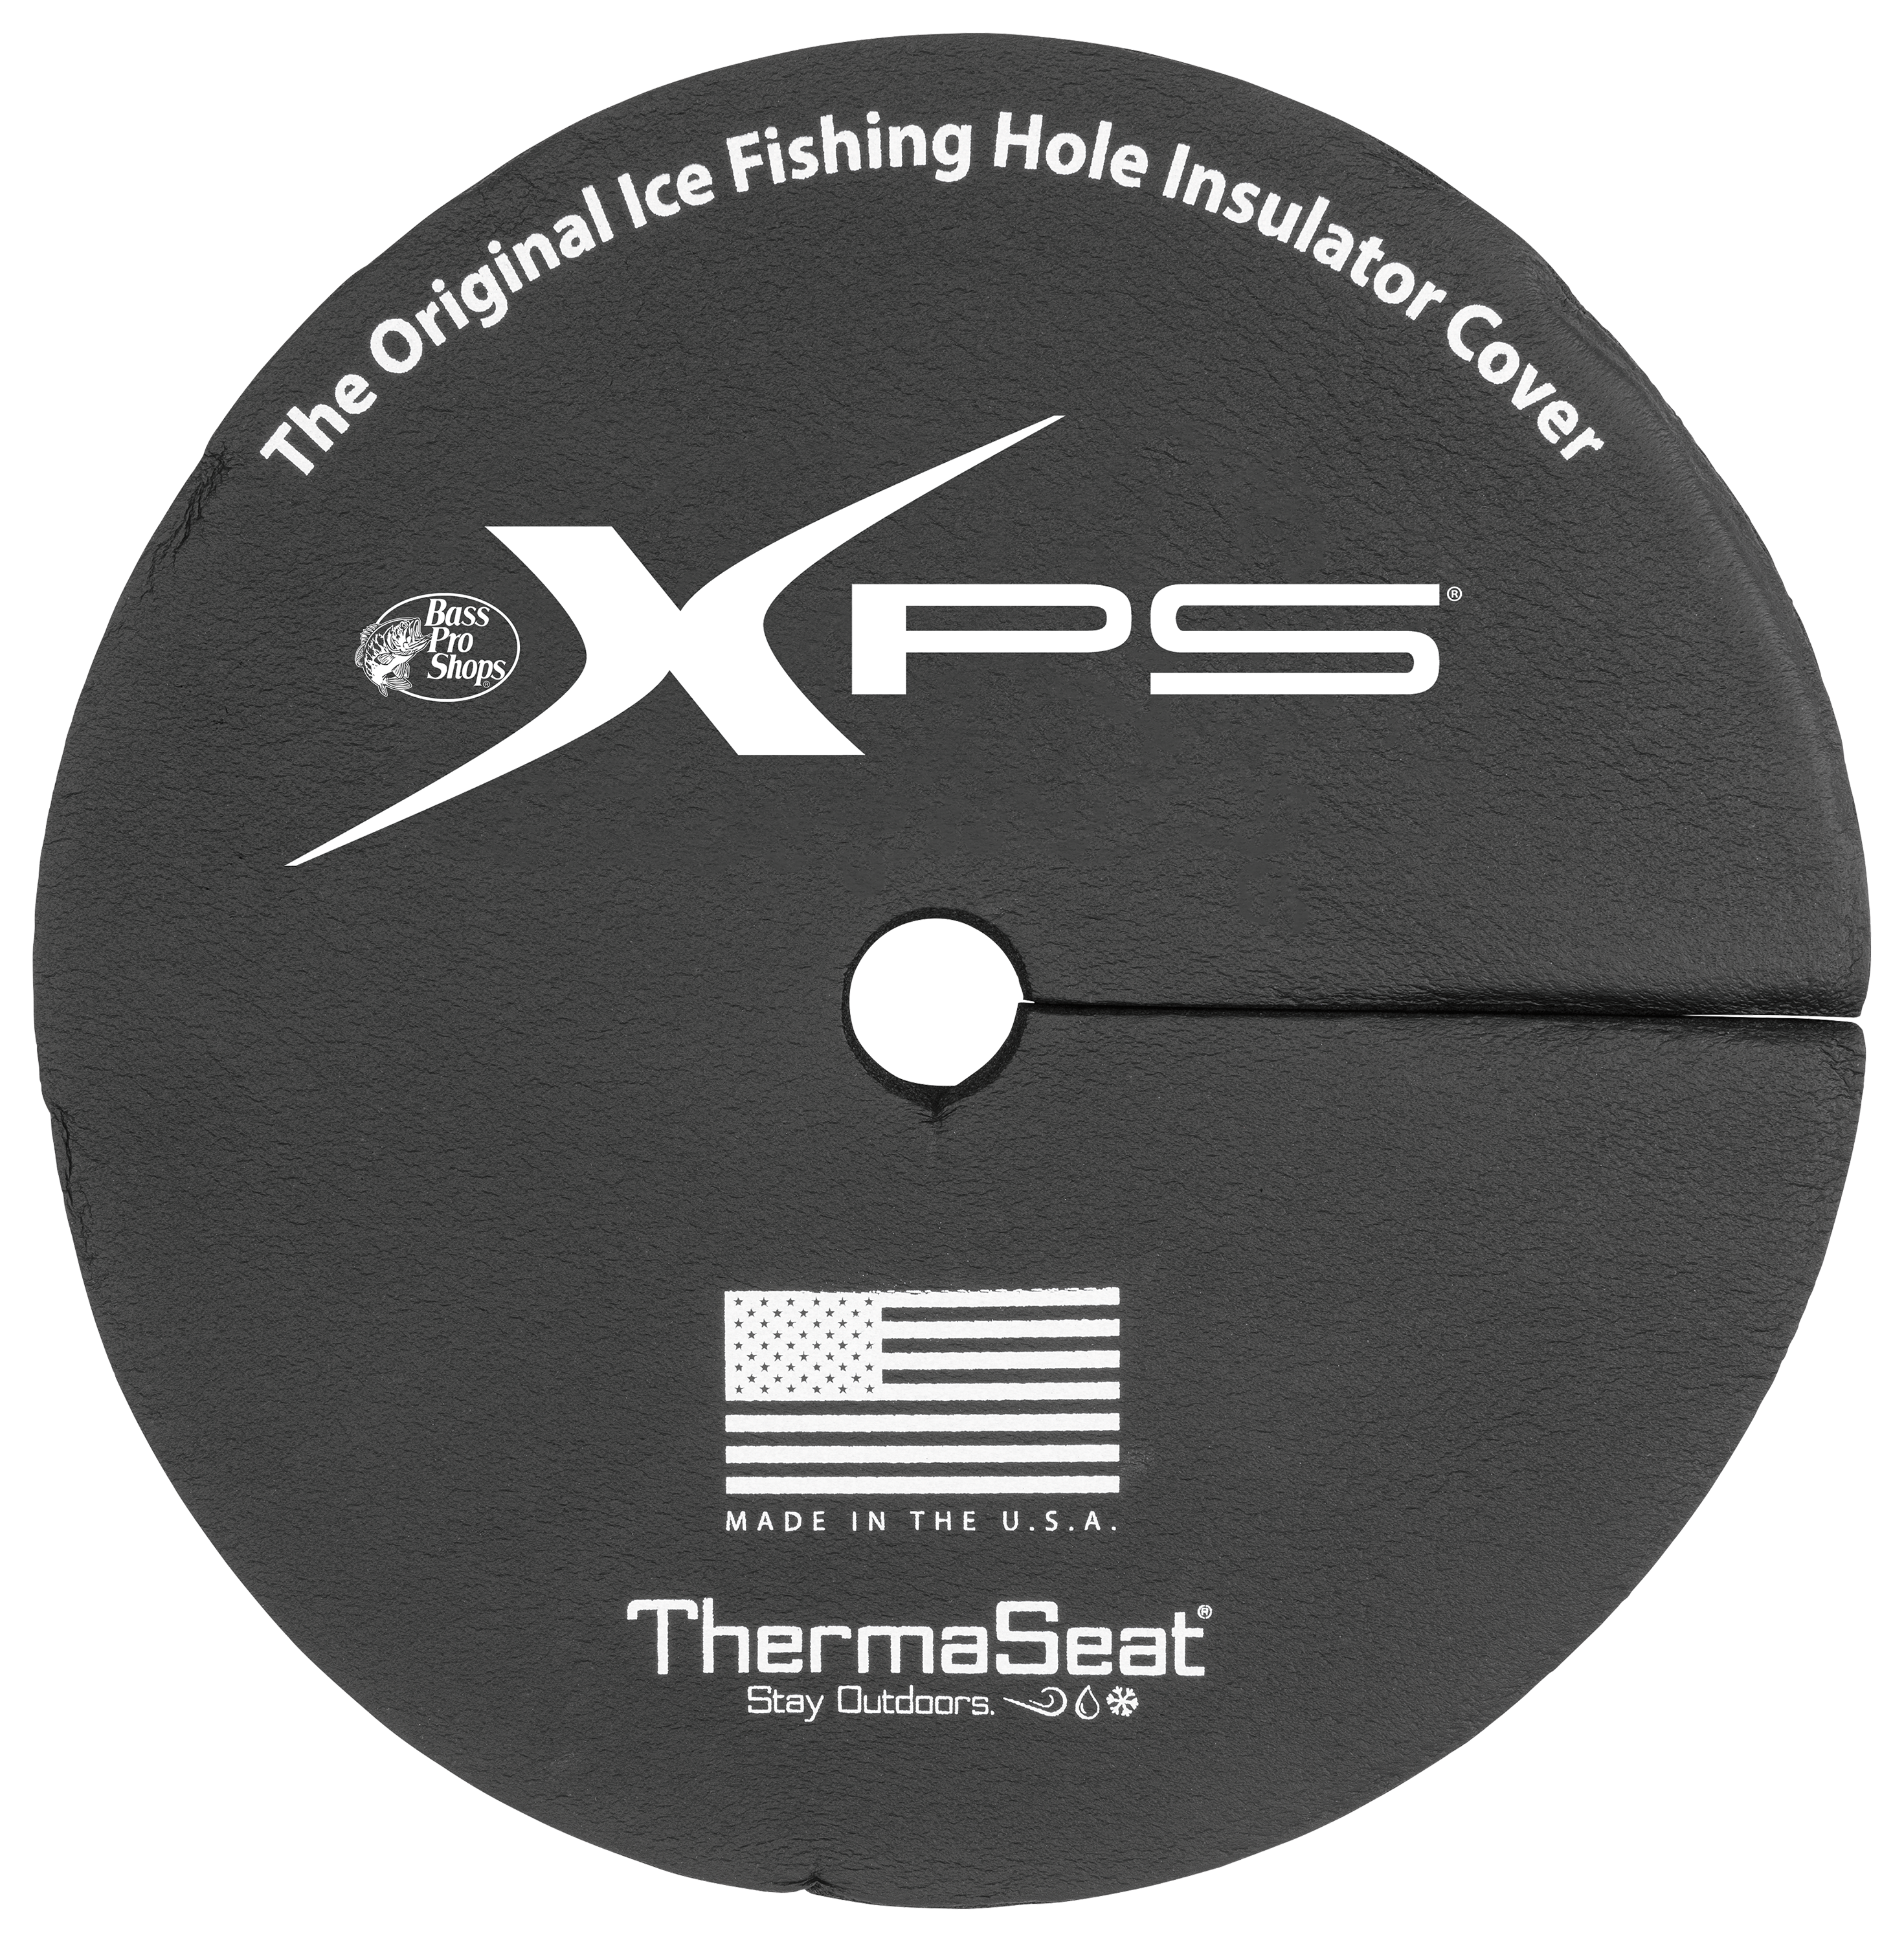 Bass Pro Shops XPS Ice Hole Cover